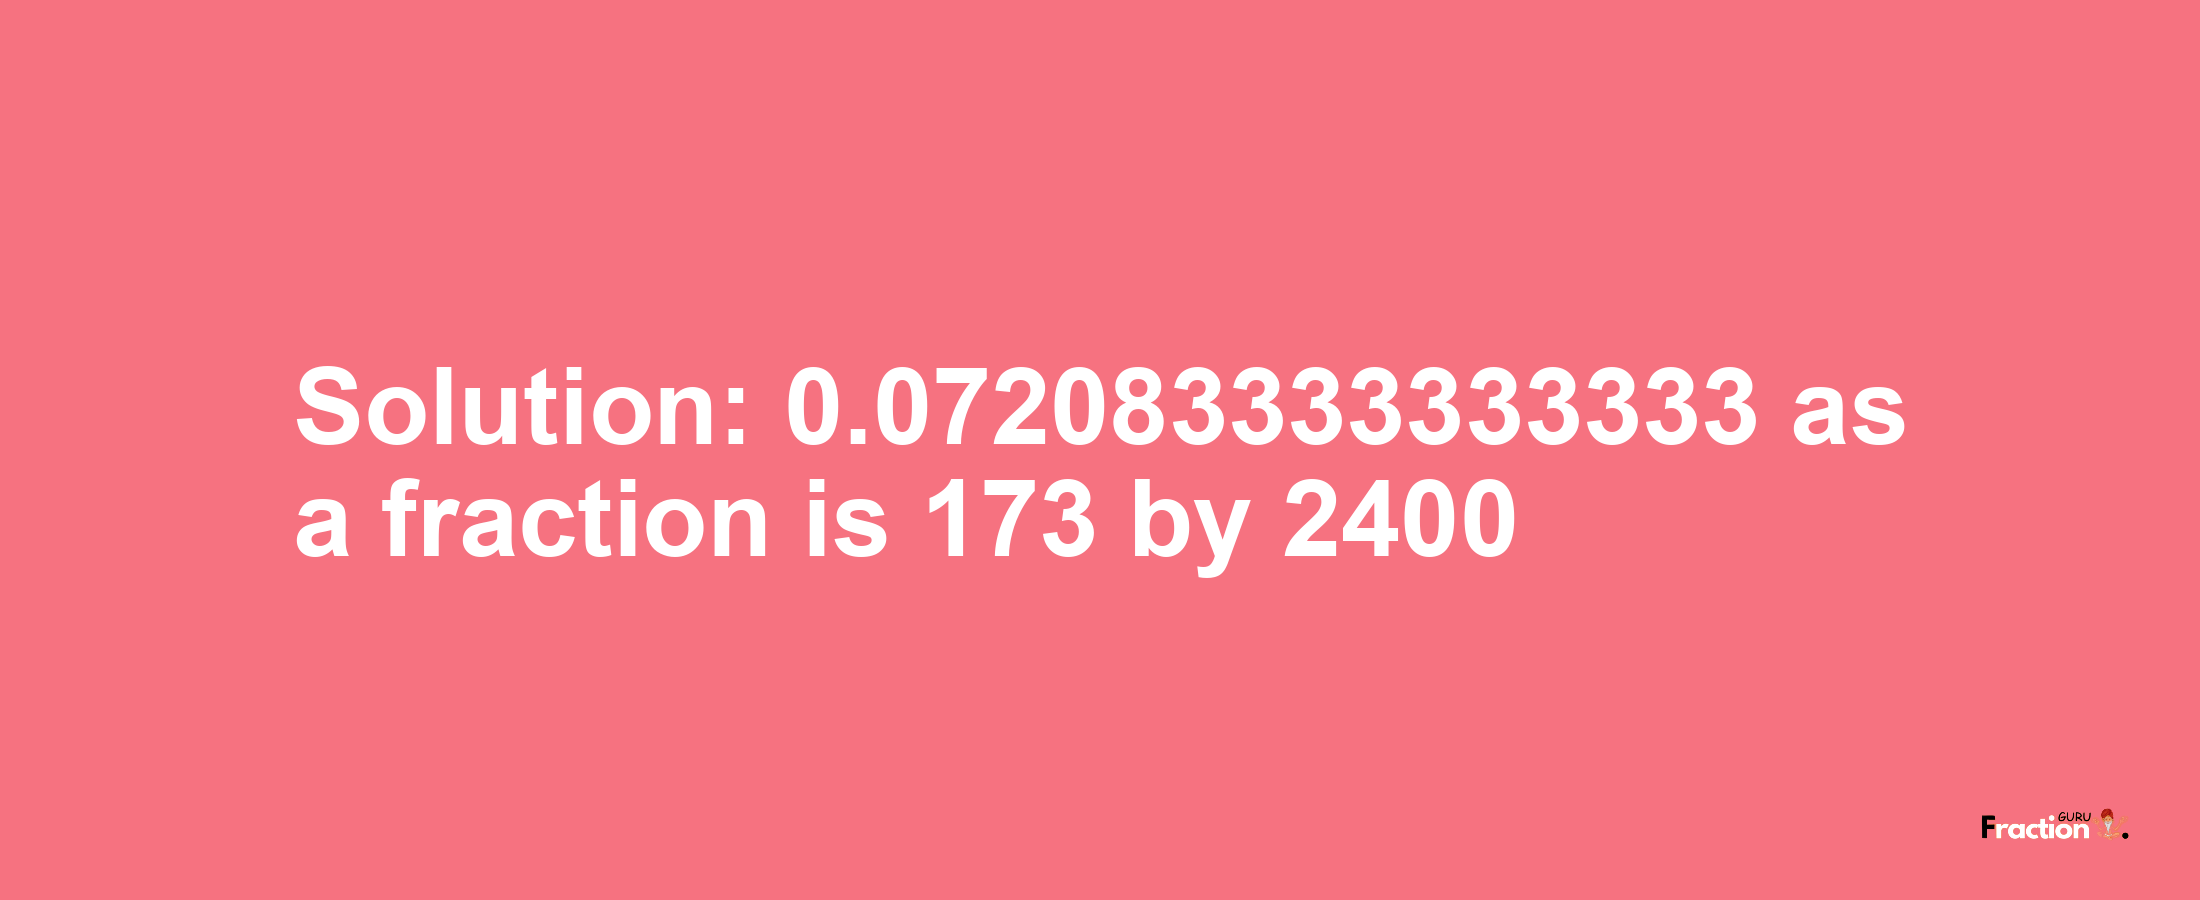 Solution:0.072083333333333 as a fraction is 173/2400